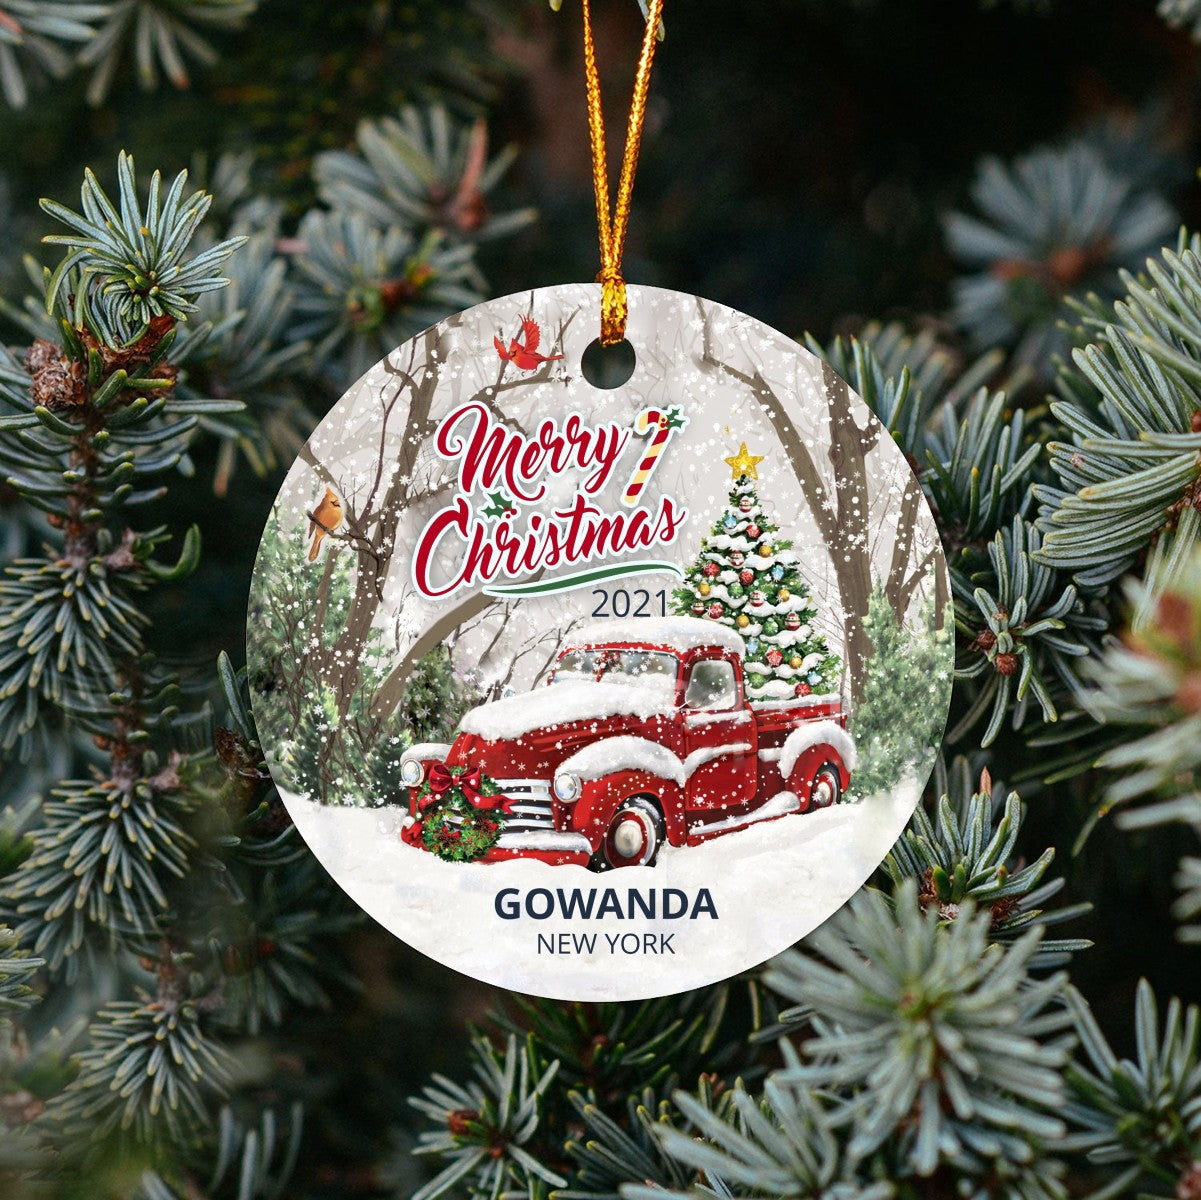 Christmas Tree Ornaments Gowanda - Ornament With Name City, State Gowanda New York NY Ornament - Red Truck Xmas Ornaments 3'' Plastic Gift For Family, Friend And Housewarming